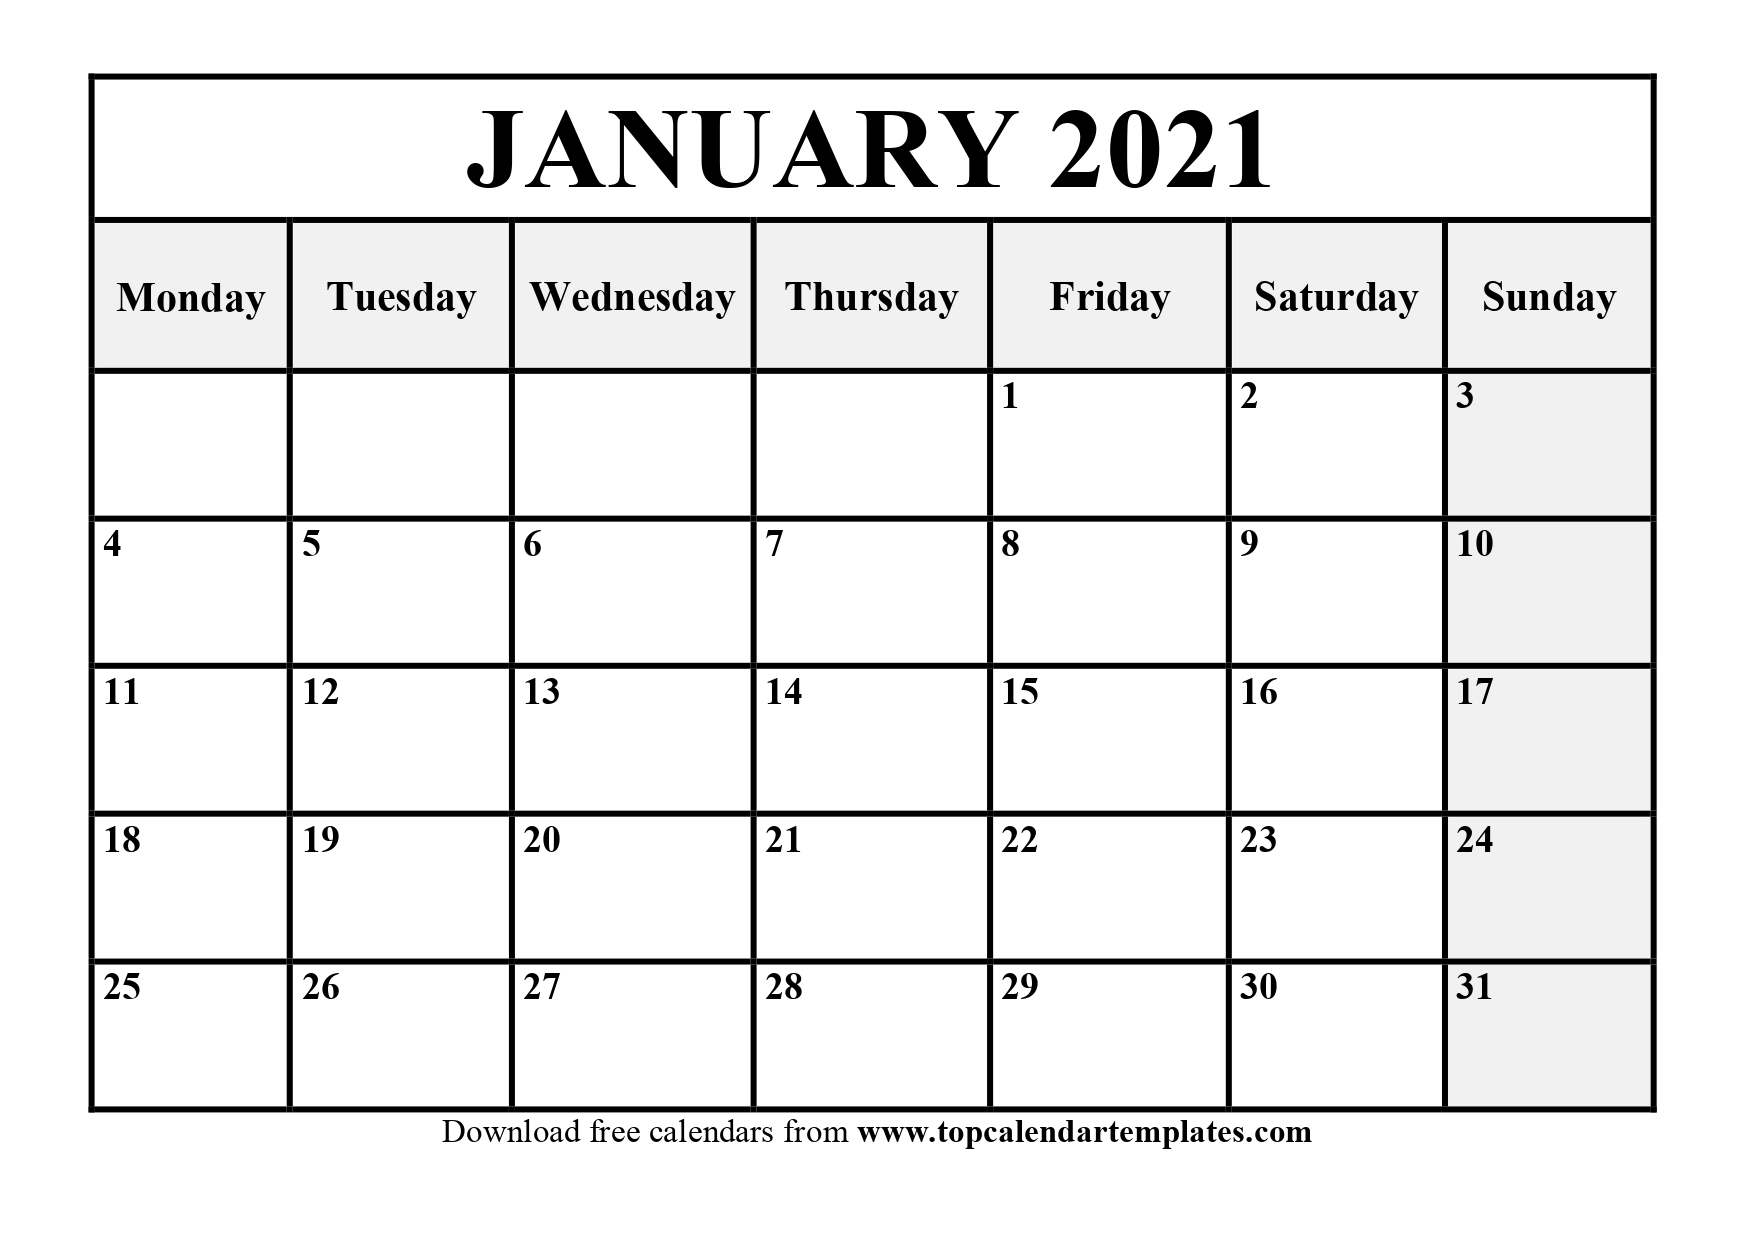 Free 2021 Yearly Calender Template : Calendar 2021